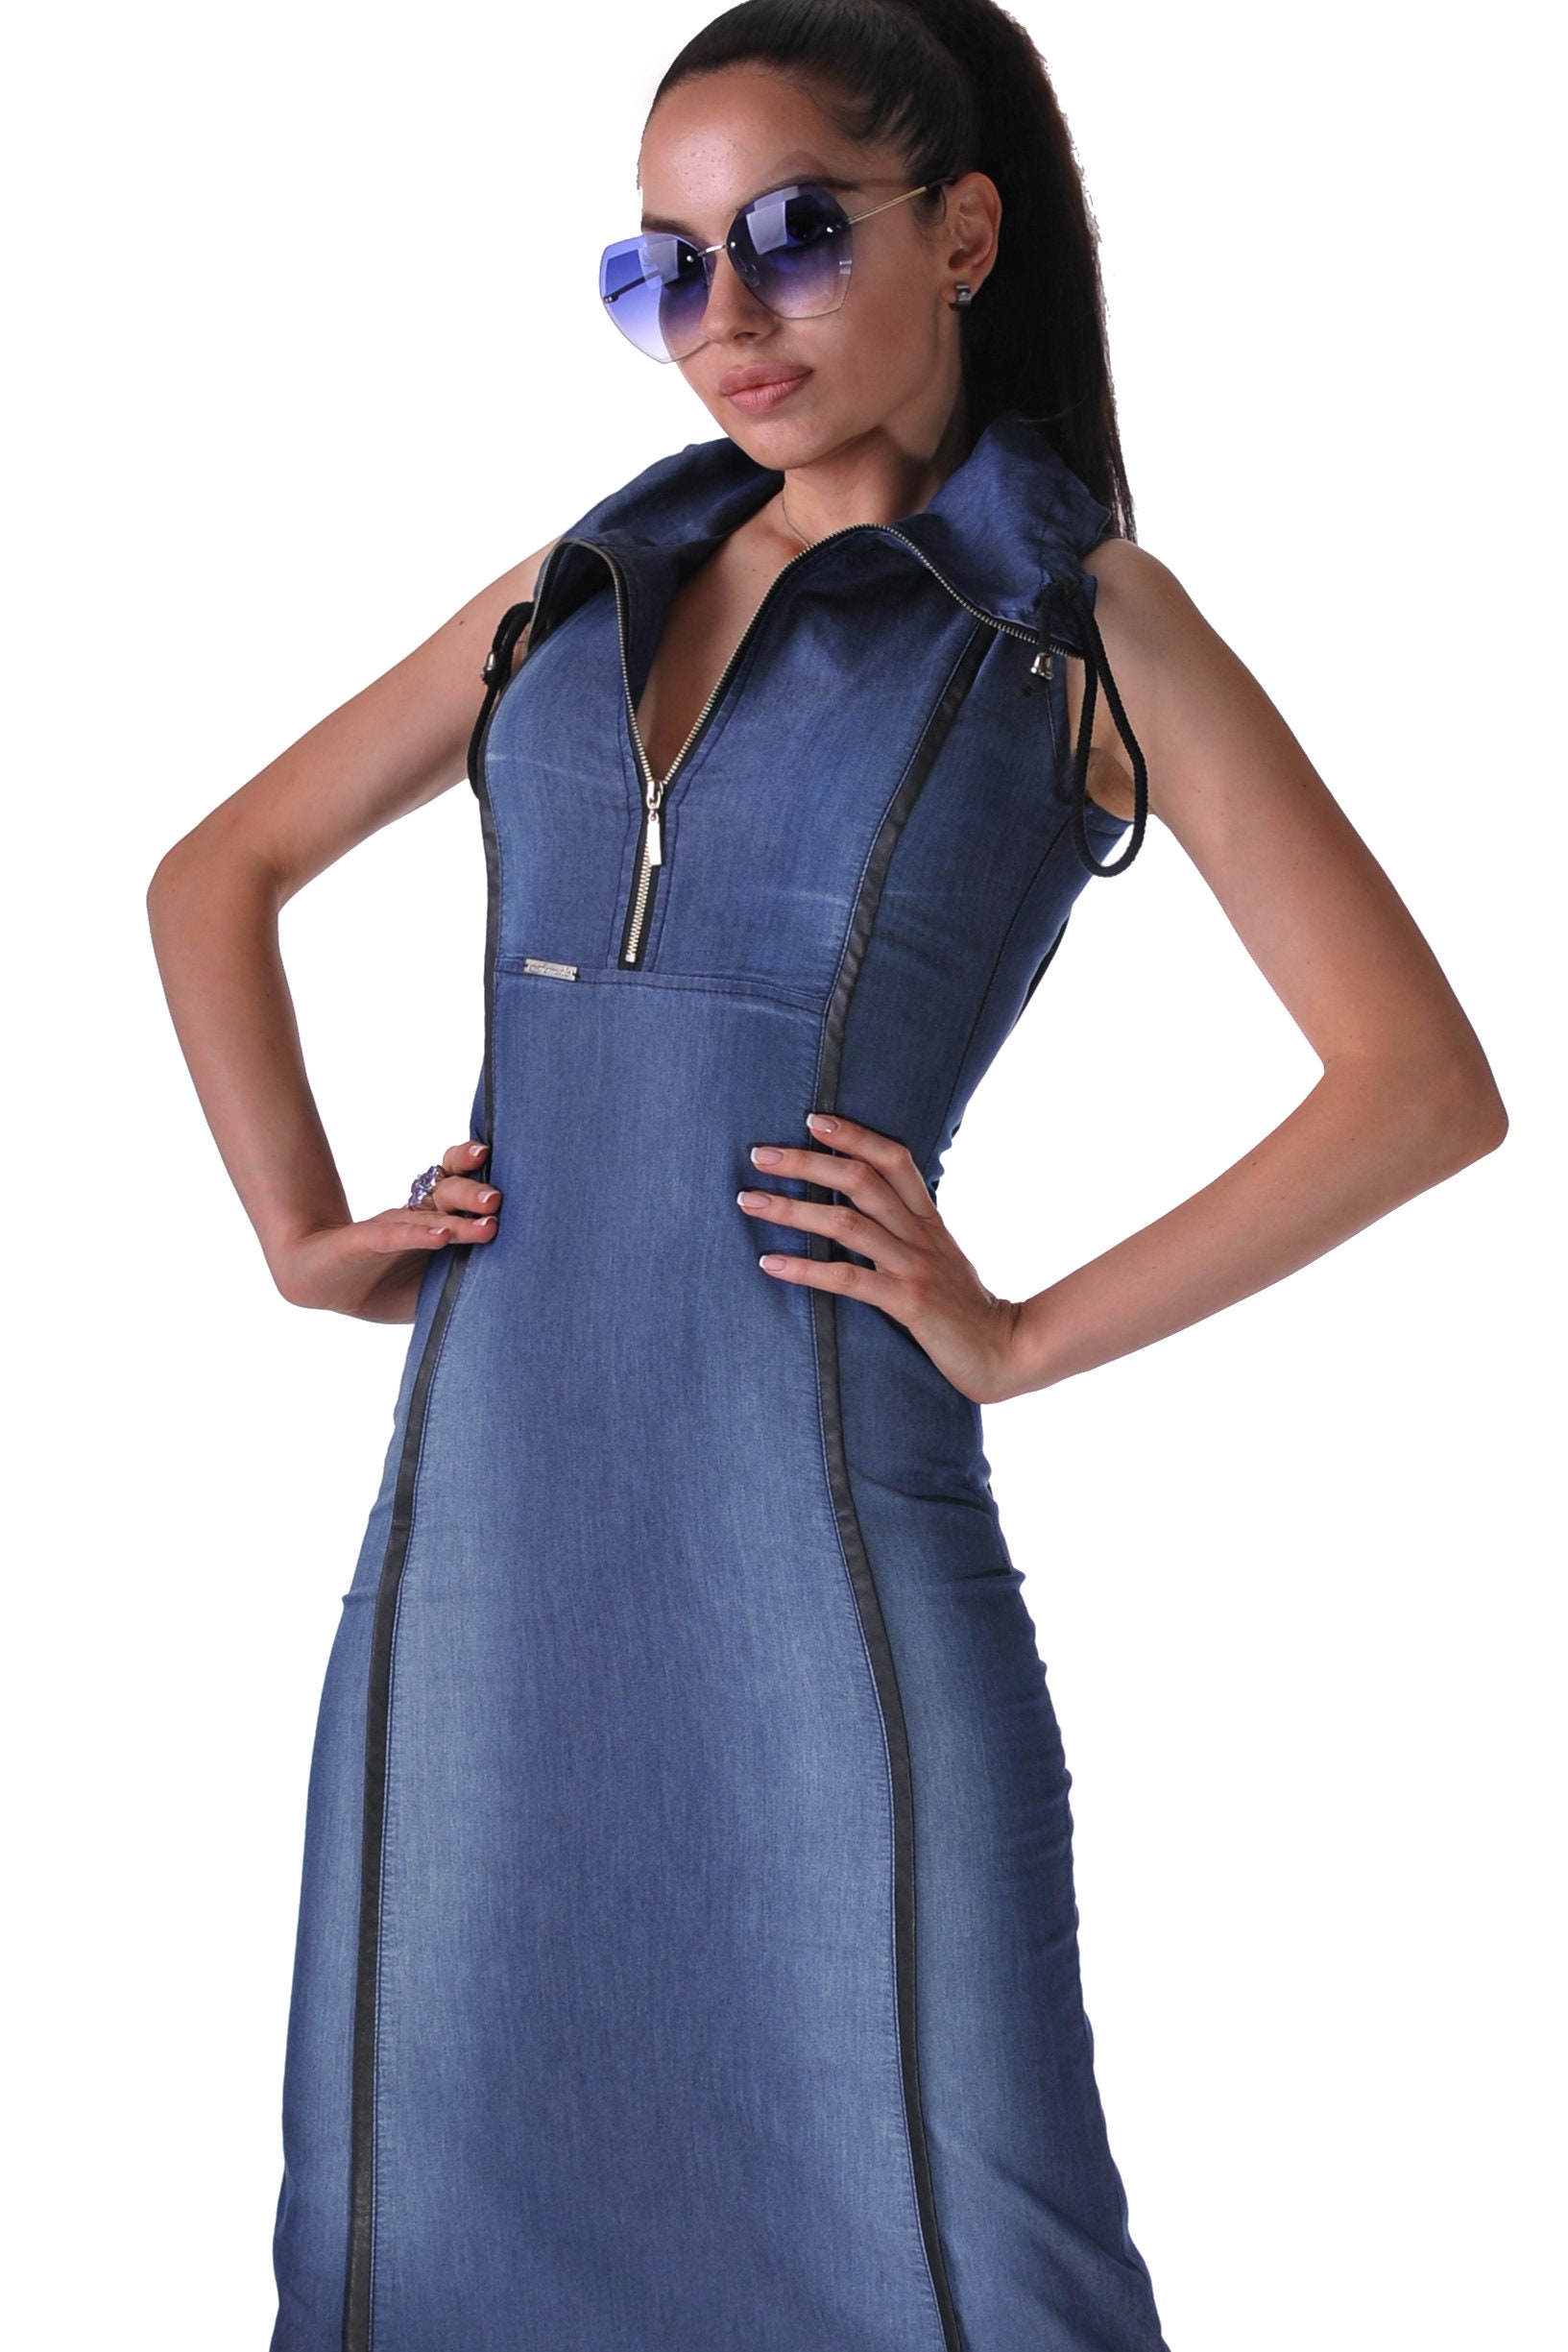 High Waist Summer Denim Bodycon Dress For Women Casual Y2K Jeans Dress For  Women With Ruffles, Zipper Up, And Slim Fit Perfect For Parties And Special  Occasions Vestidos 210521 From Dou04, $16.62 |